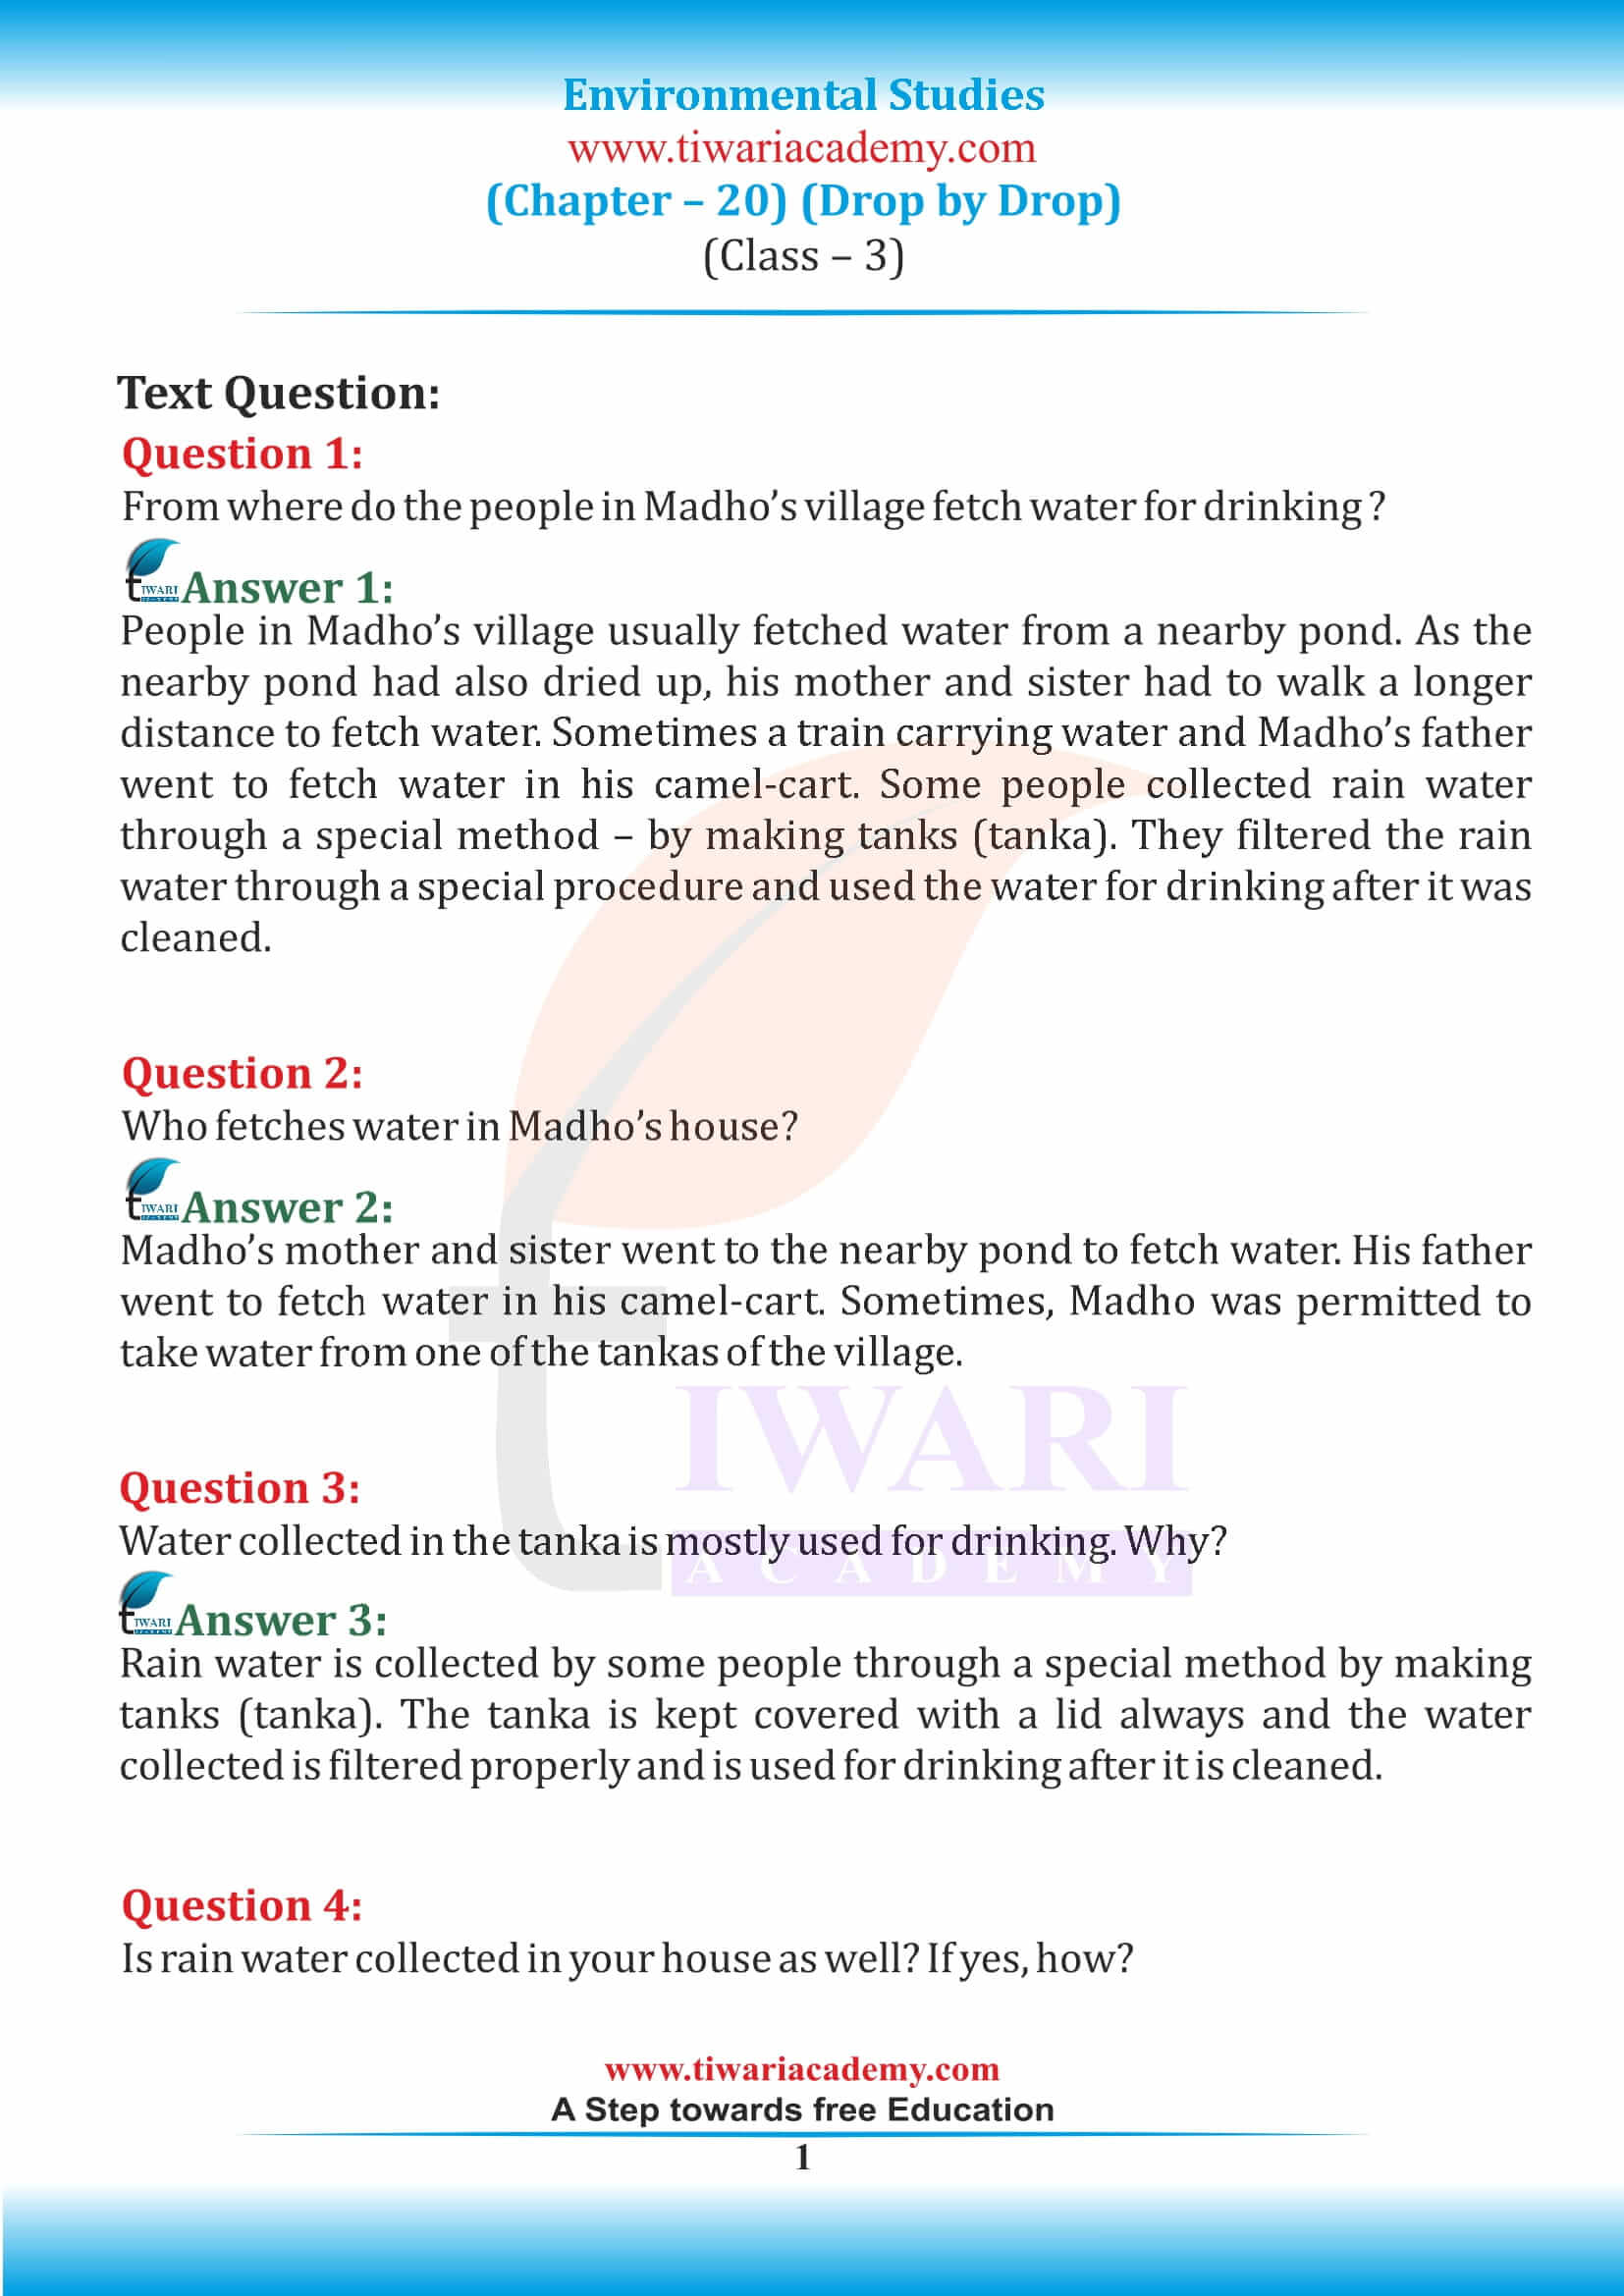 NCERT Solutions for Class 3 EVS Chapter 20 Drop by Drop